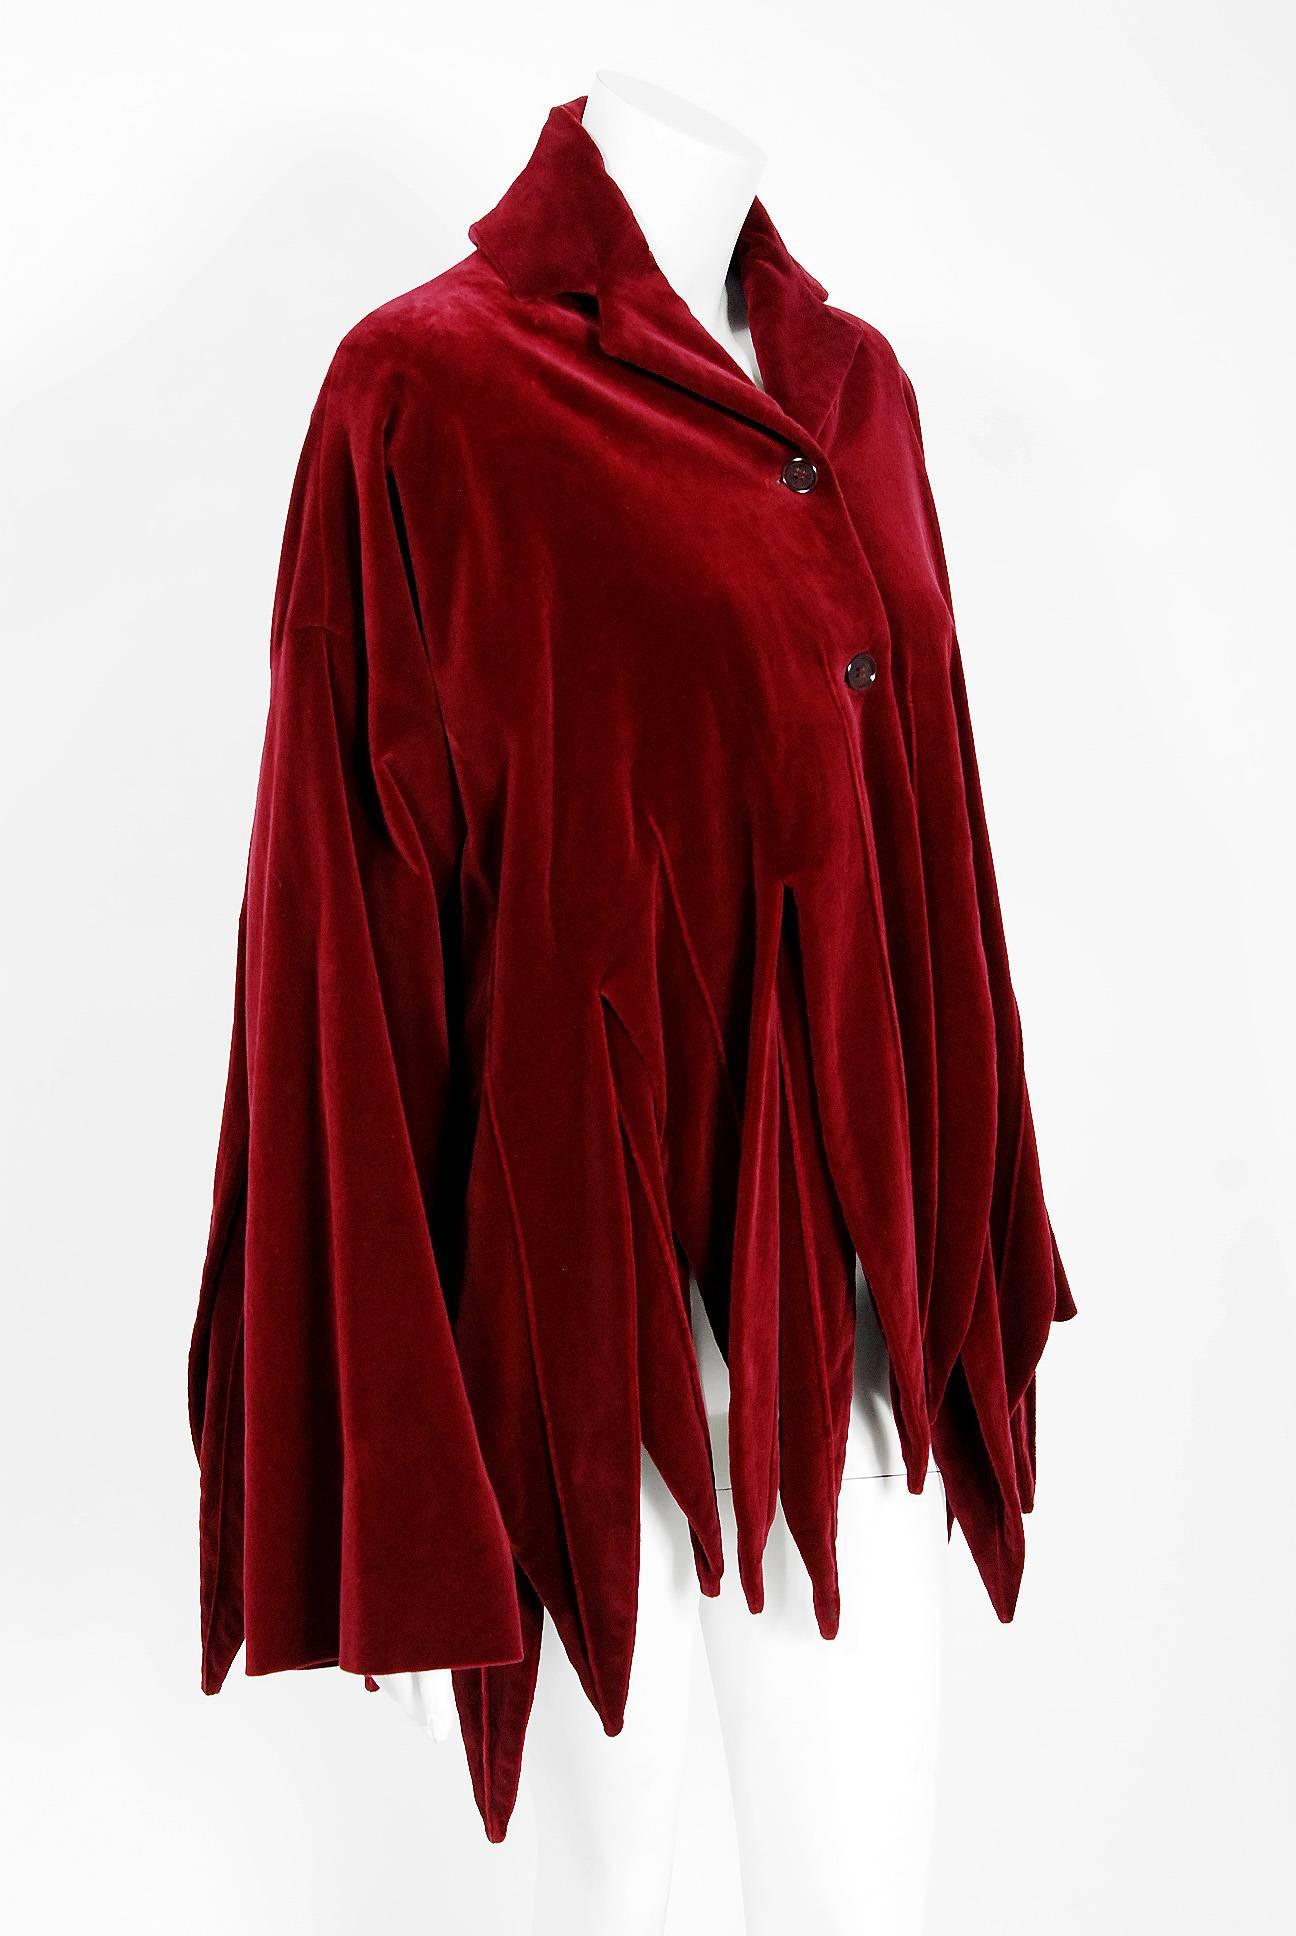 Breathtaking 1987 Romeo Gigli runway 'Jester' designer jacket in the most fabulous burgundy-red velvet. The twin version of this gorgeous piece is held in the permanent archives of The Metropolitan Museum. The construction is impeccable and has the